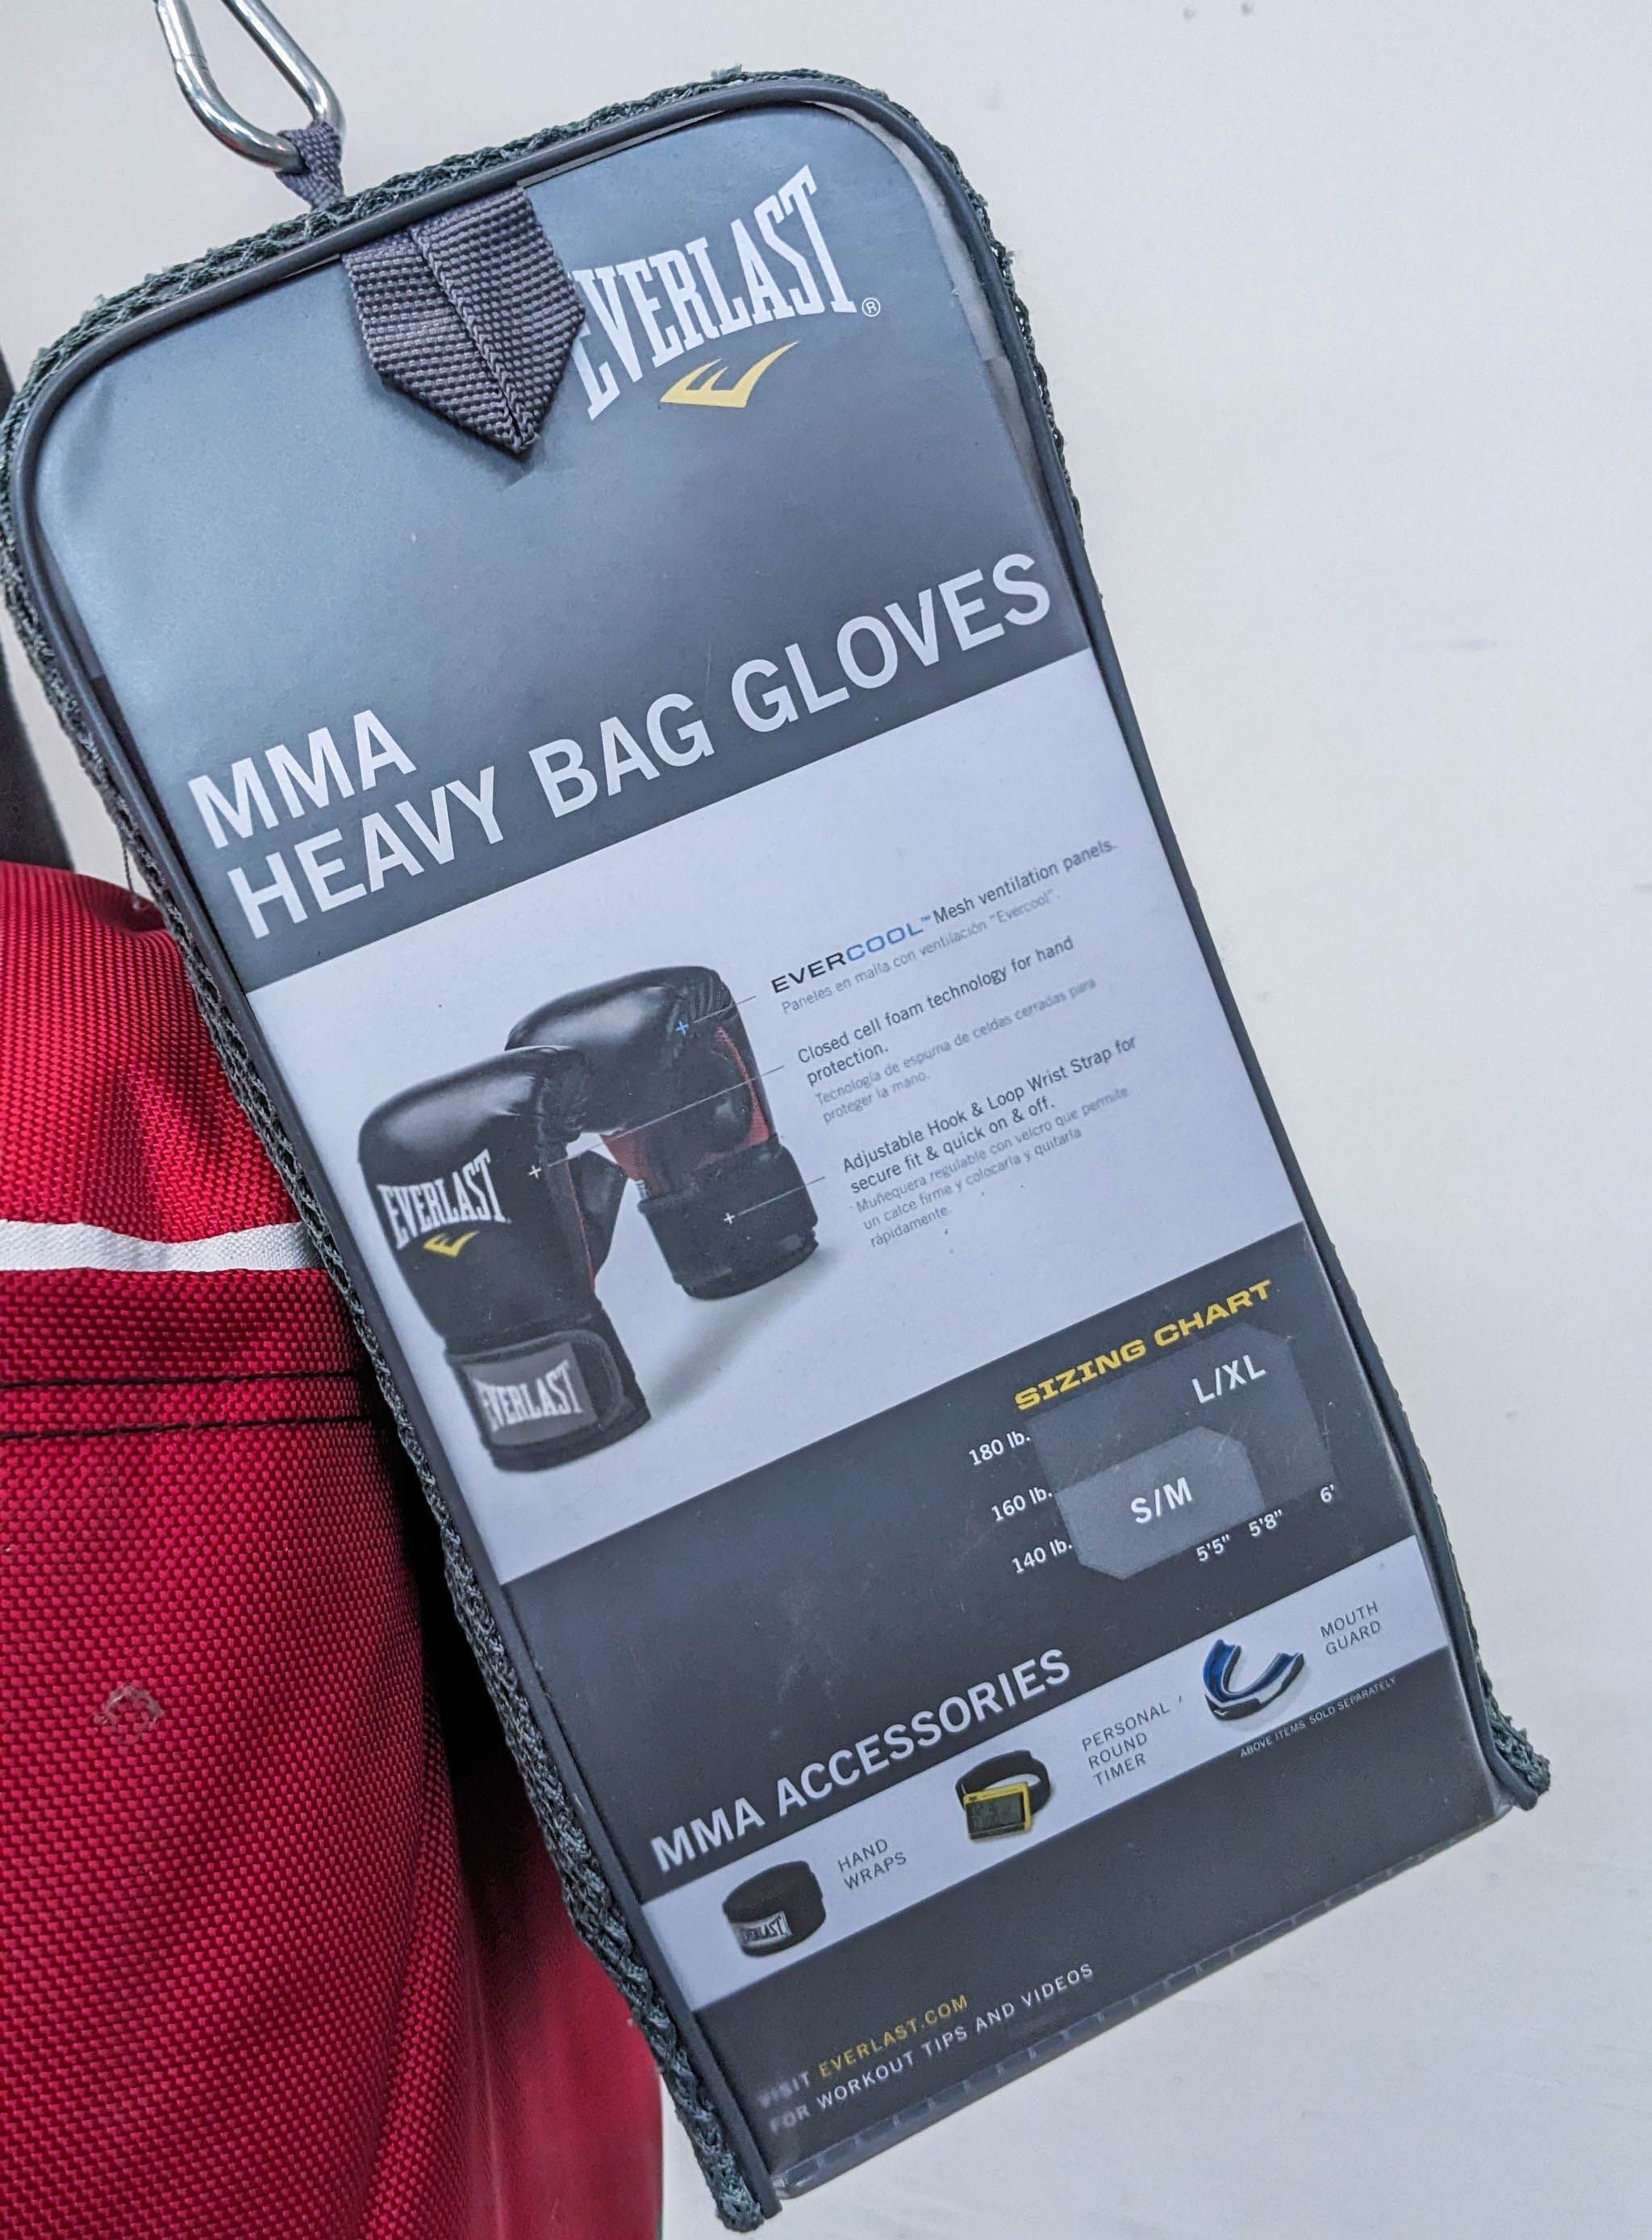 Everlast MMA heavy bag gloves packaging attached to a free-standing heavy bag, highlighting features and sizing chart for training gear.